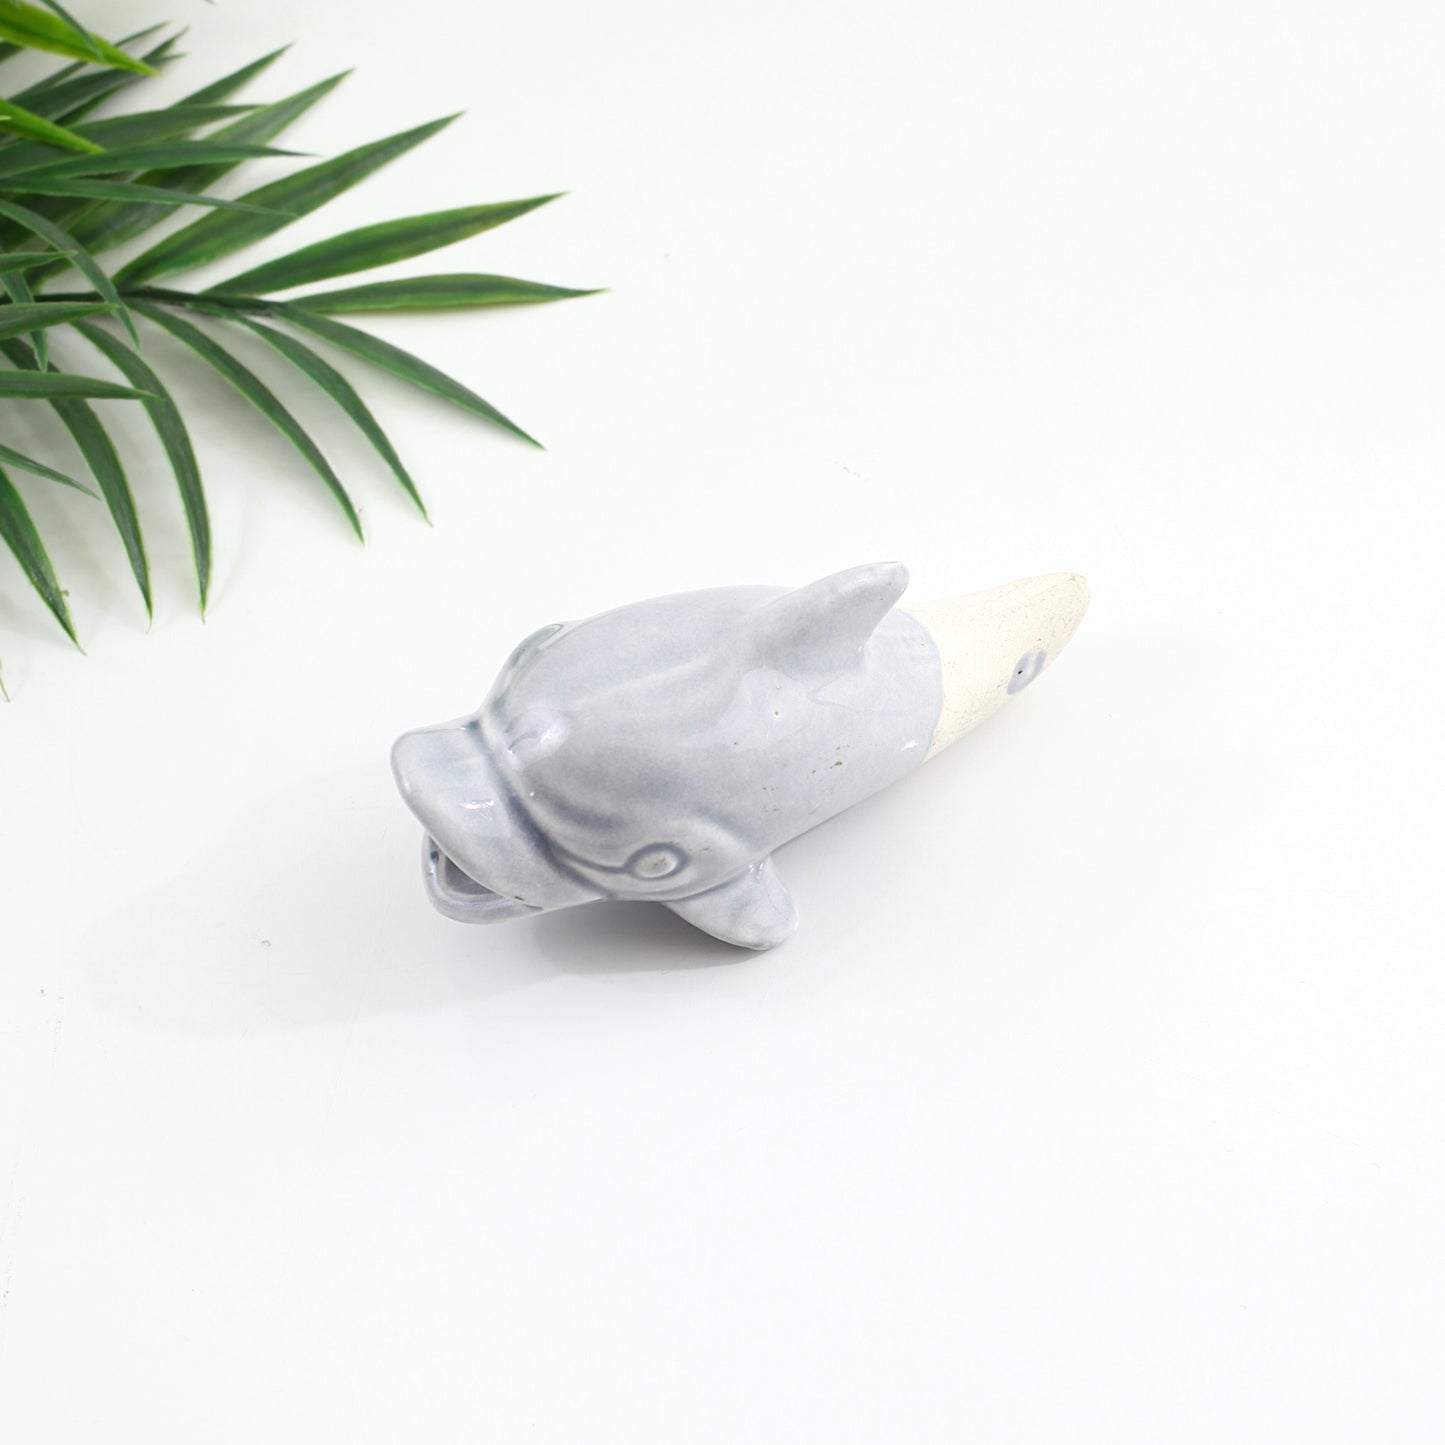 SOLD - Vintage Ceramic Dolphin Plant Watering Spike